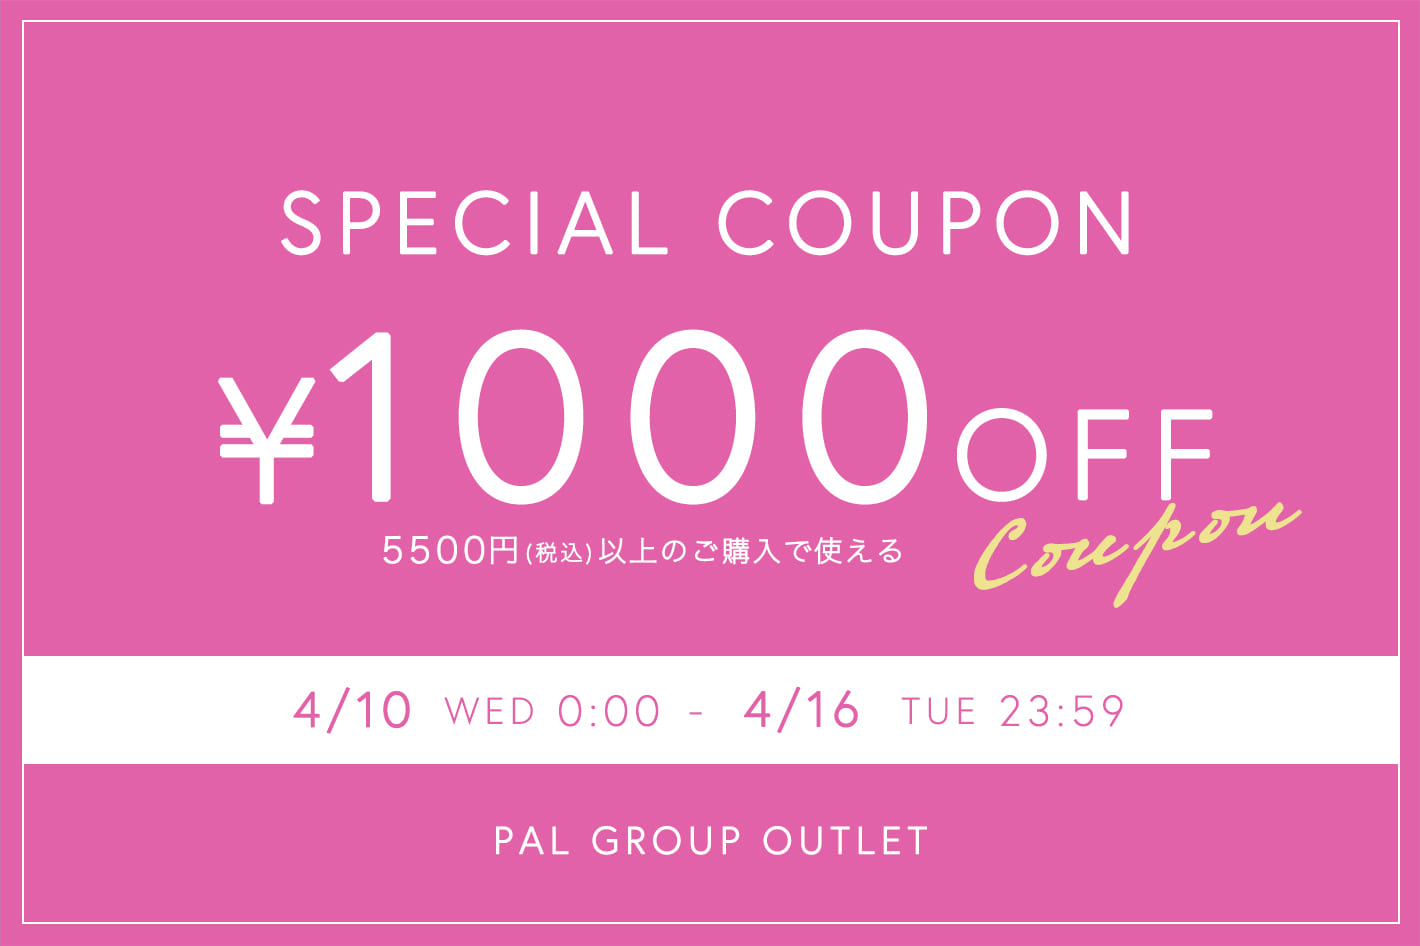 OUTLET 【PAL GROUP OUTLET限定】1,000円OFFクーポンキャンペーン開催！